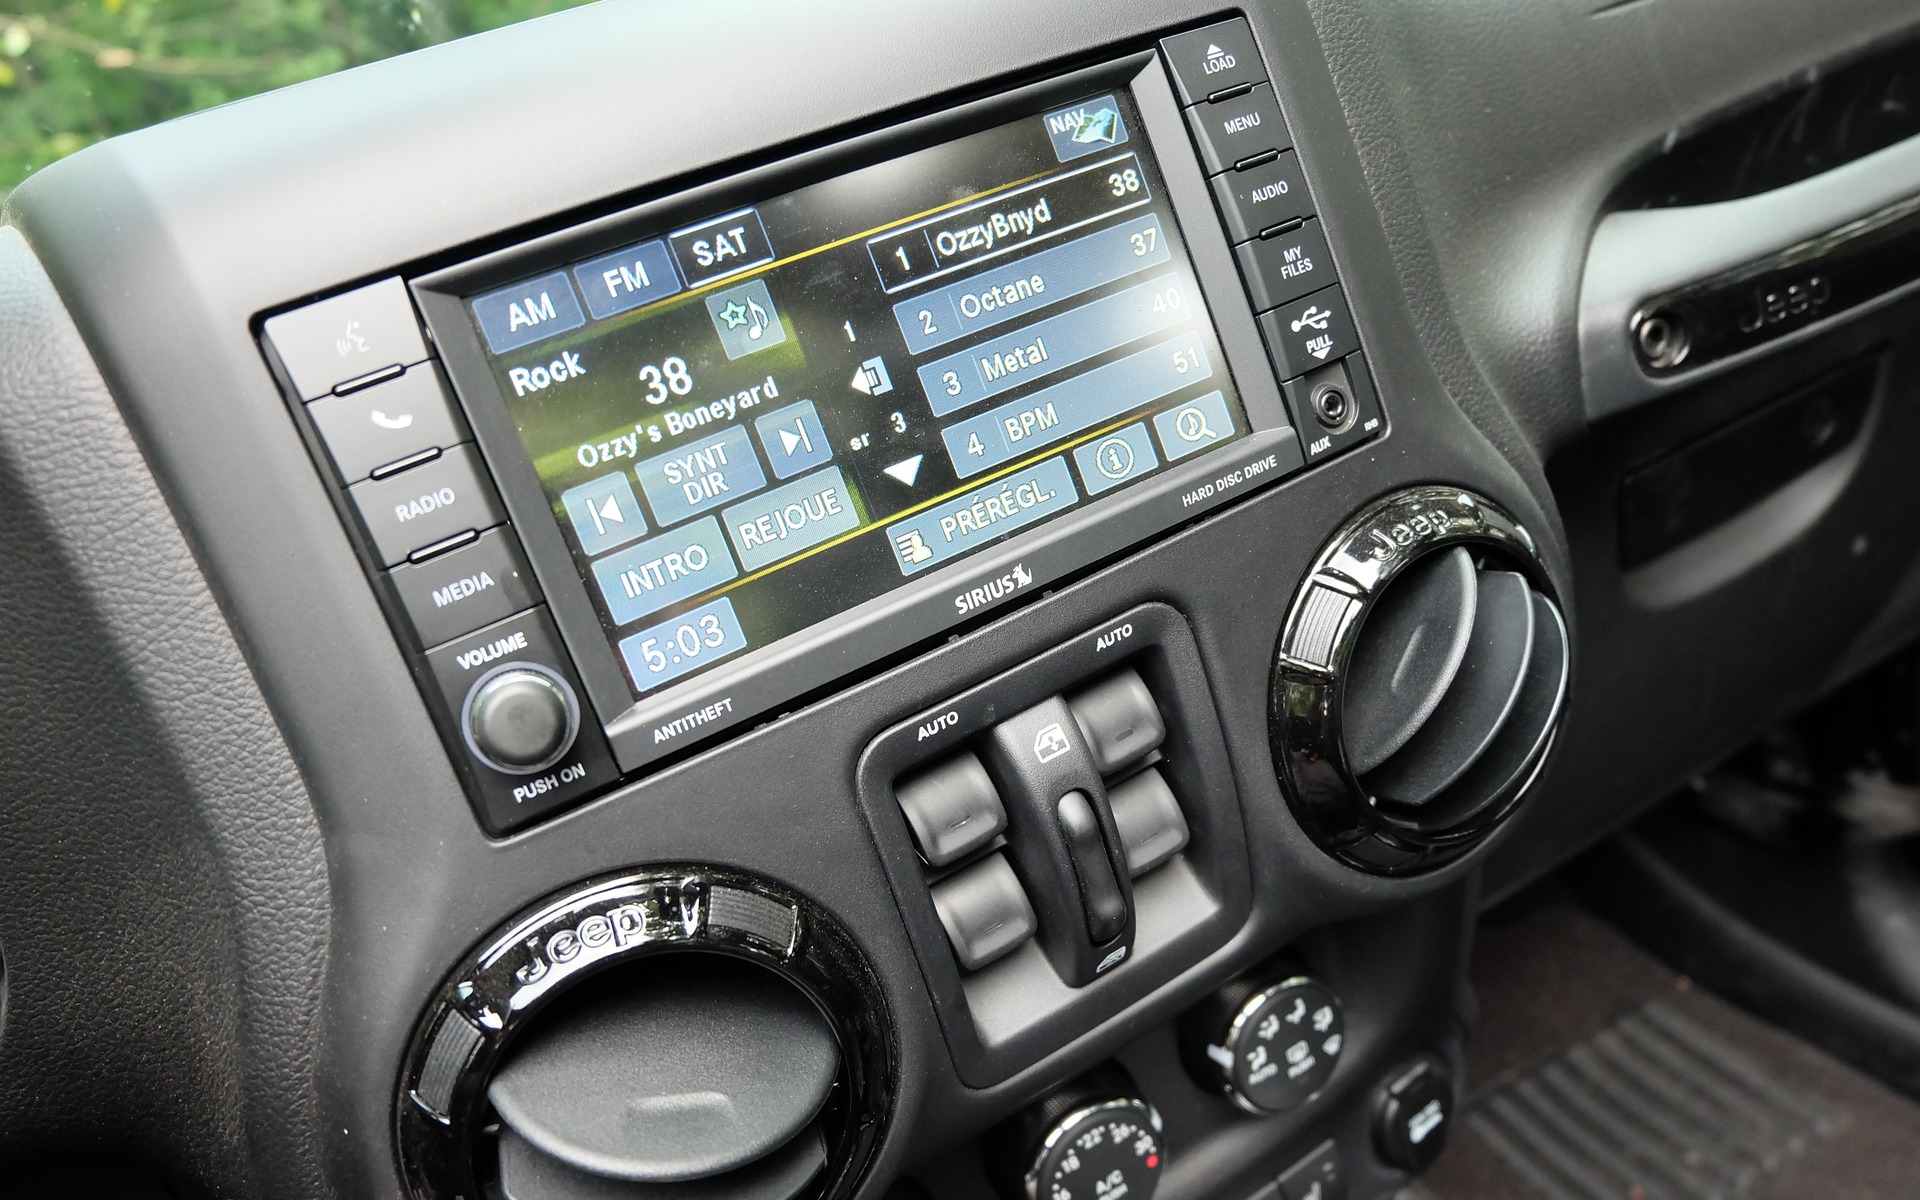 The infotainment system may be dated, but it works flawlessly.